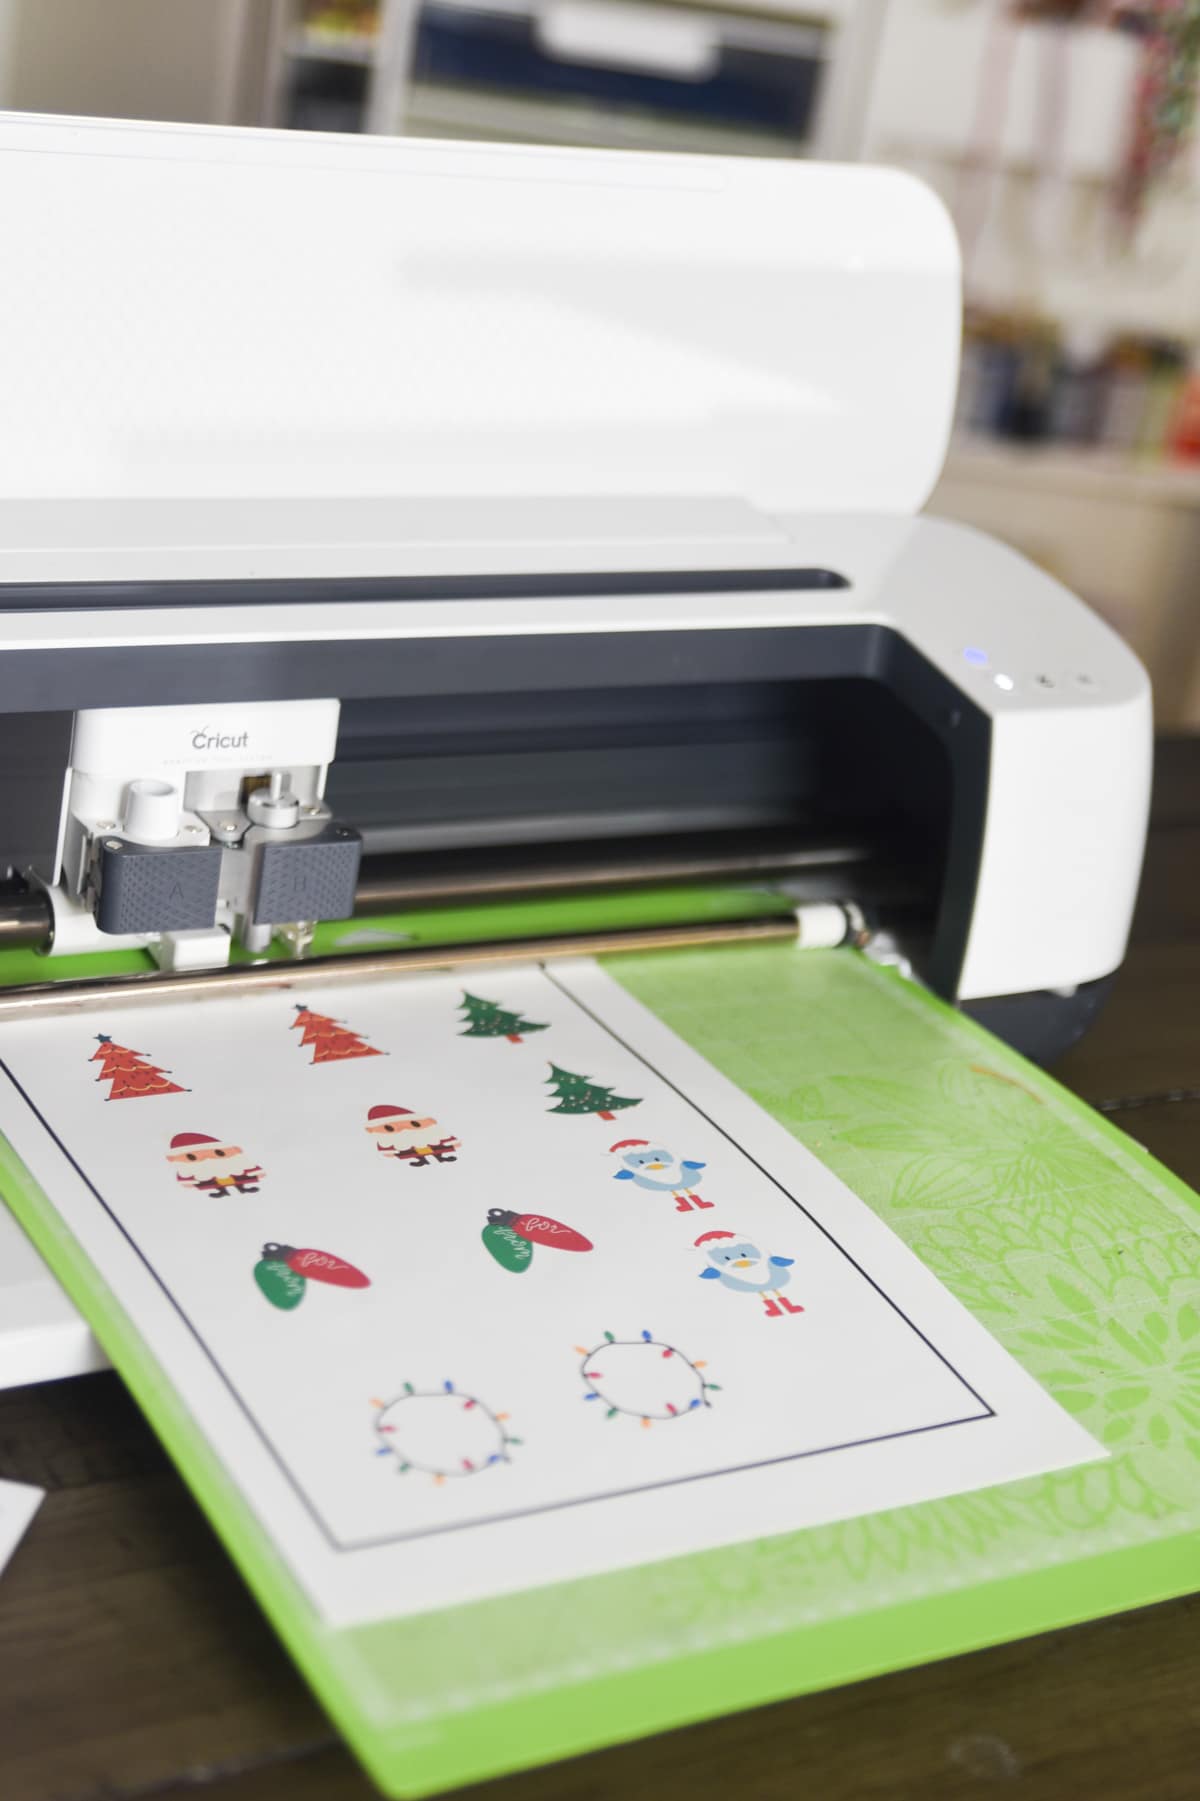 Must try: customize your Cricut with reflective vinyl decal